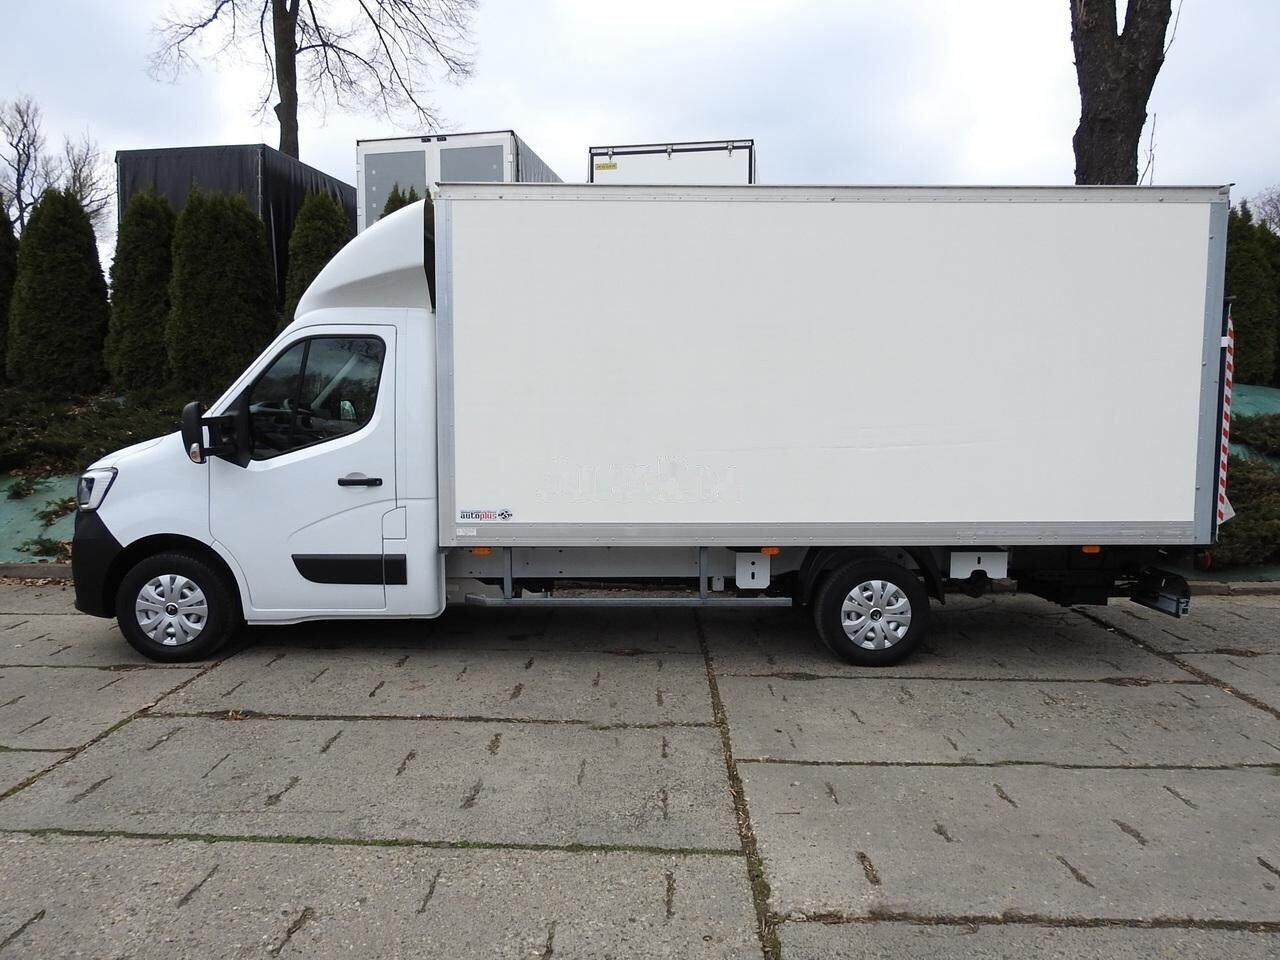 Closed box van Renault Koffer + tail lift: picture 5